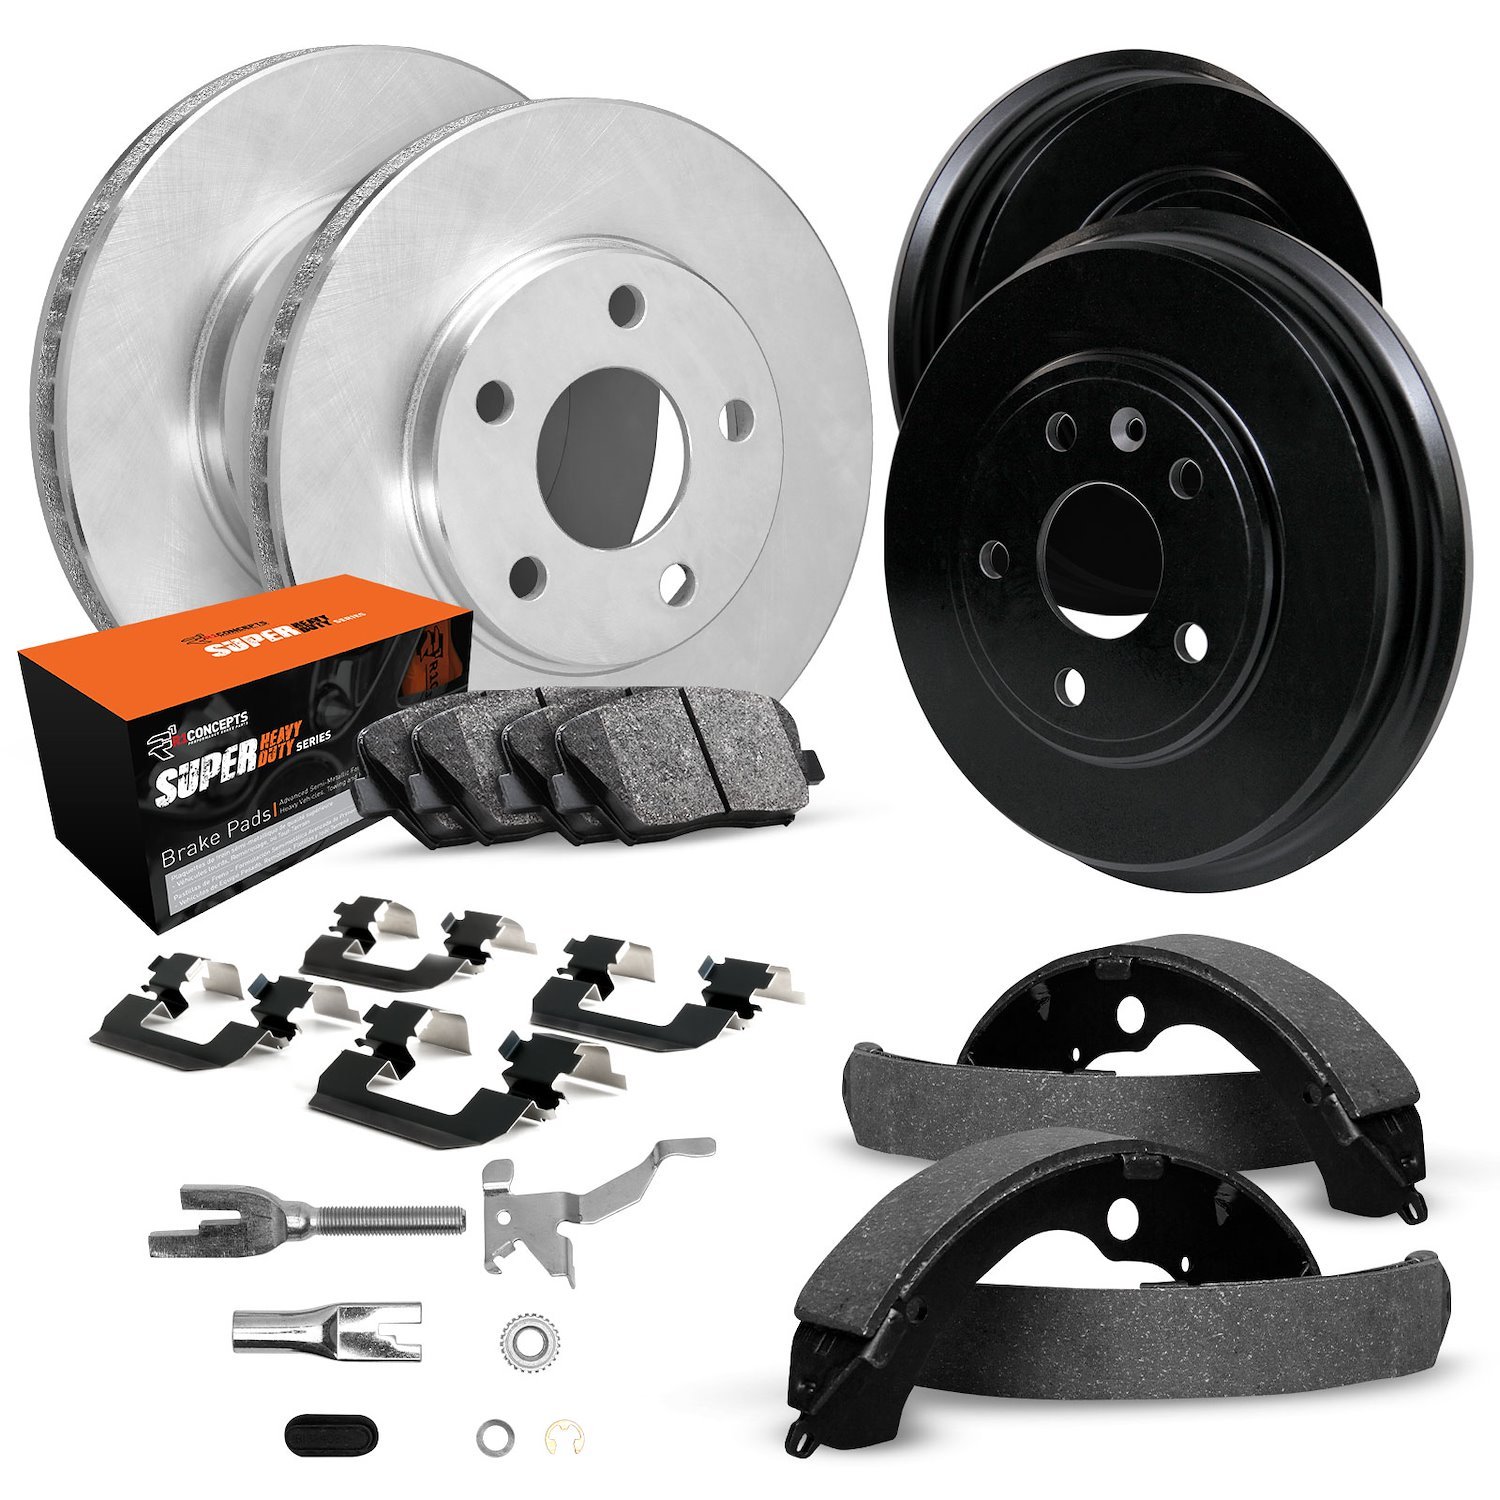 E-Line Blank Brake Rotor & Drum Set w/Super-Duty Pads, Shoes, Hardware, & Adjusters, 1978-1978 GM, Position: Front & Rear